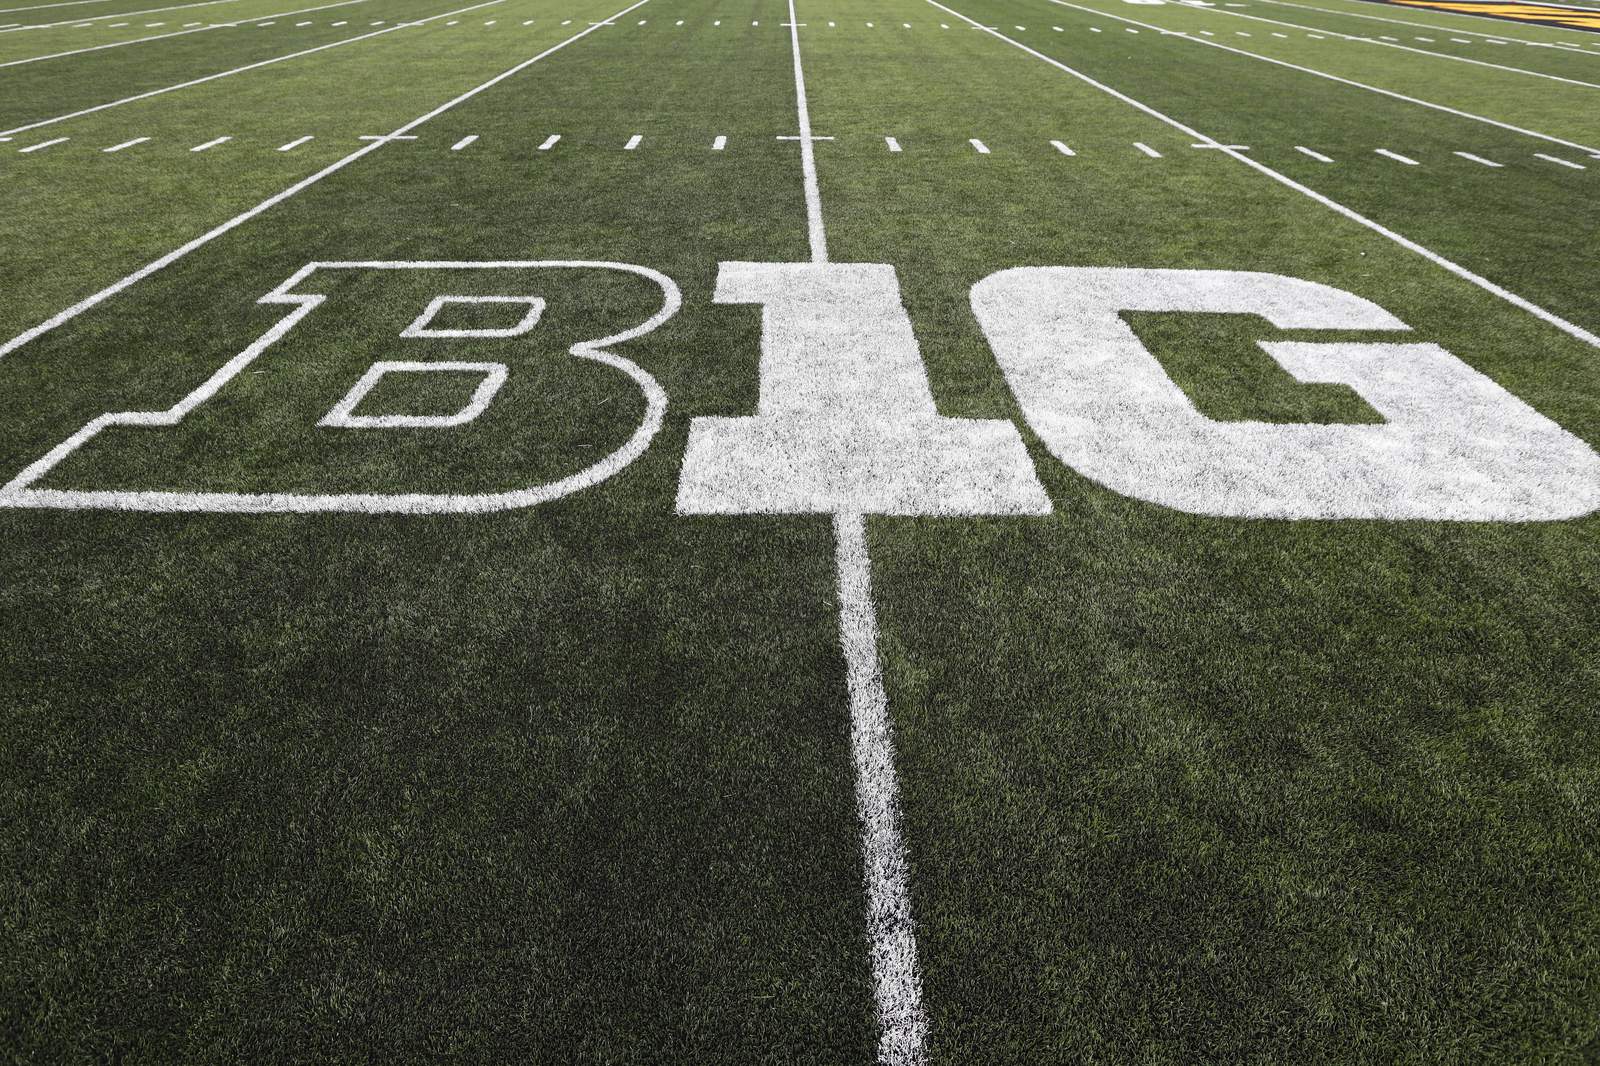 Trump calls on Big Ten Conference to play fall football